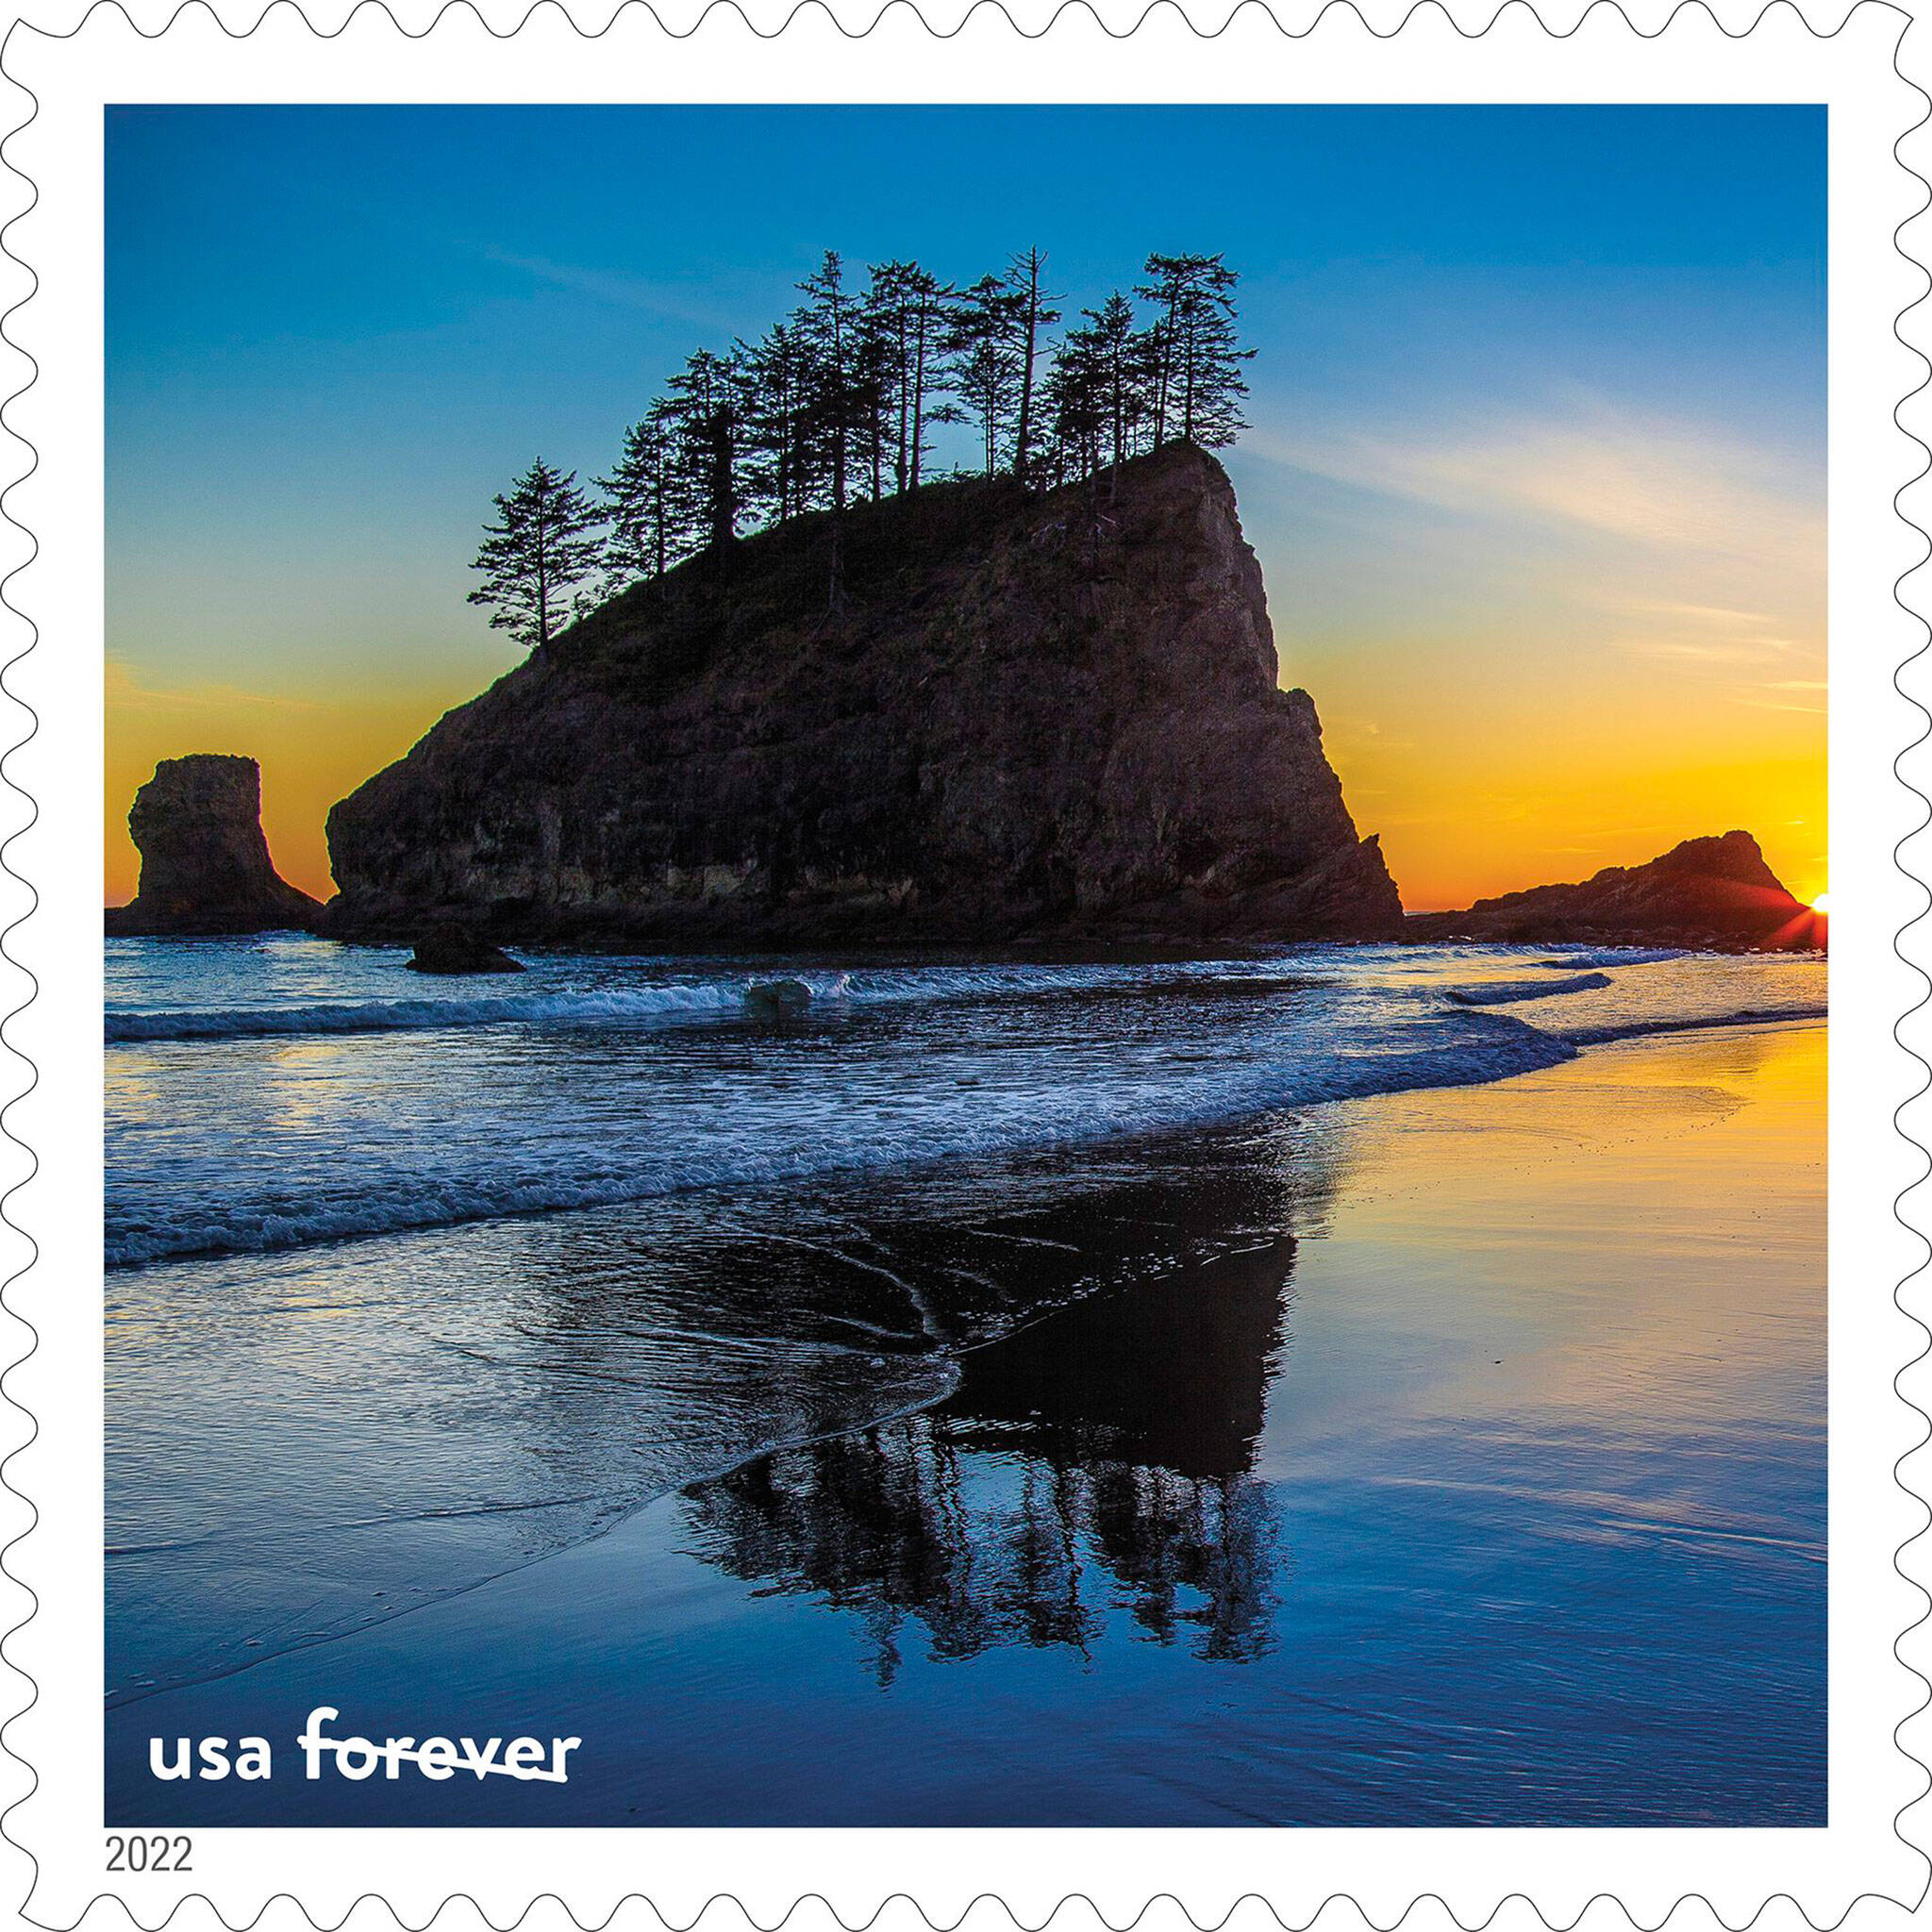 Crying Lady Rock on Second Beach in Clallam County is part of a stamp set celebrating the Marine Protection, Research and Sanctuaries Act being signed into law Oct 23, 1972. The photograph was taken by Matt McIntosh. (Photo courtesy USPS)